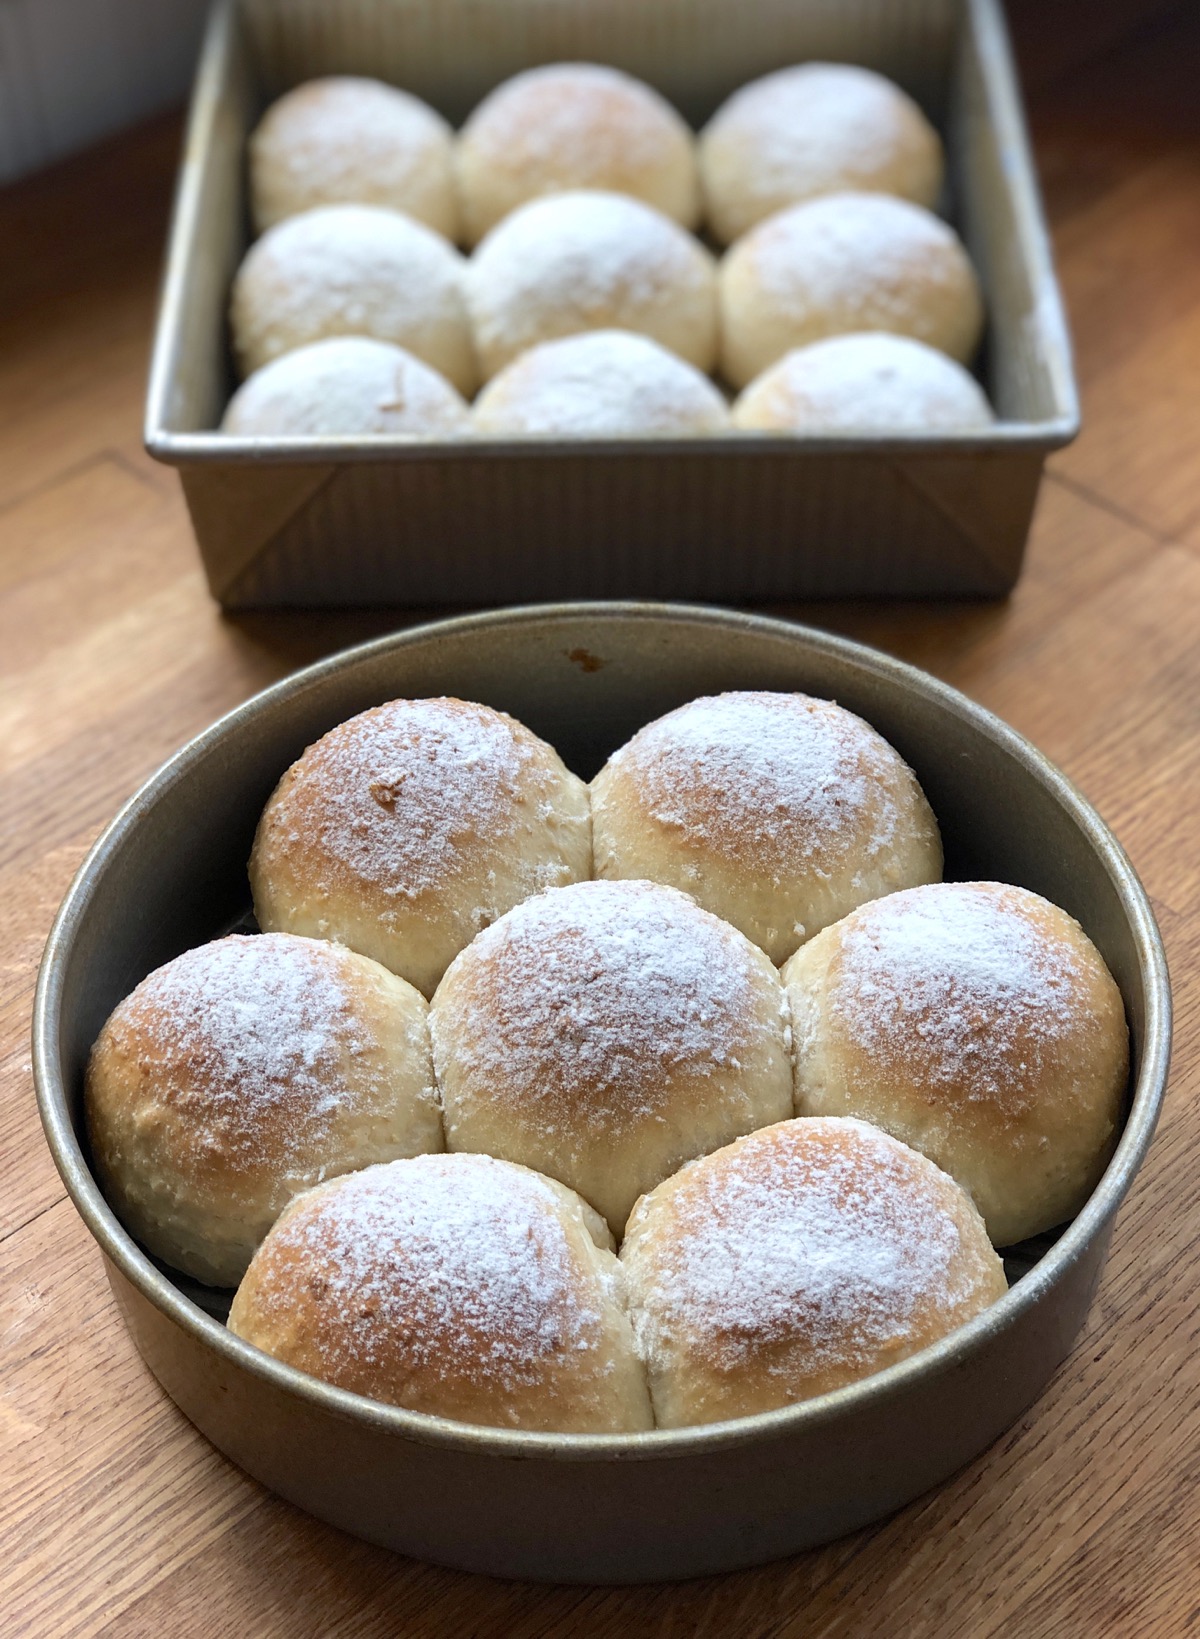 Oatmeal bread dough shaped into dinner rolls and baked